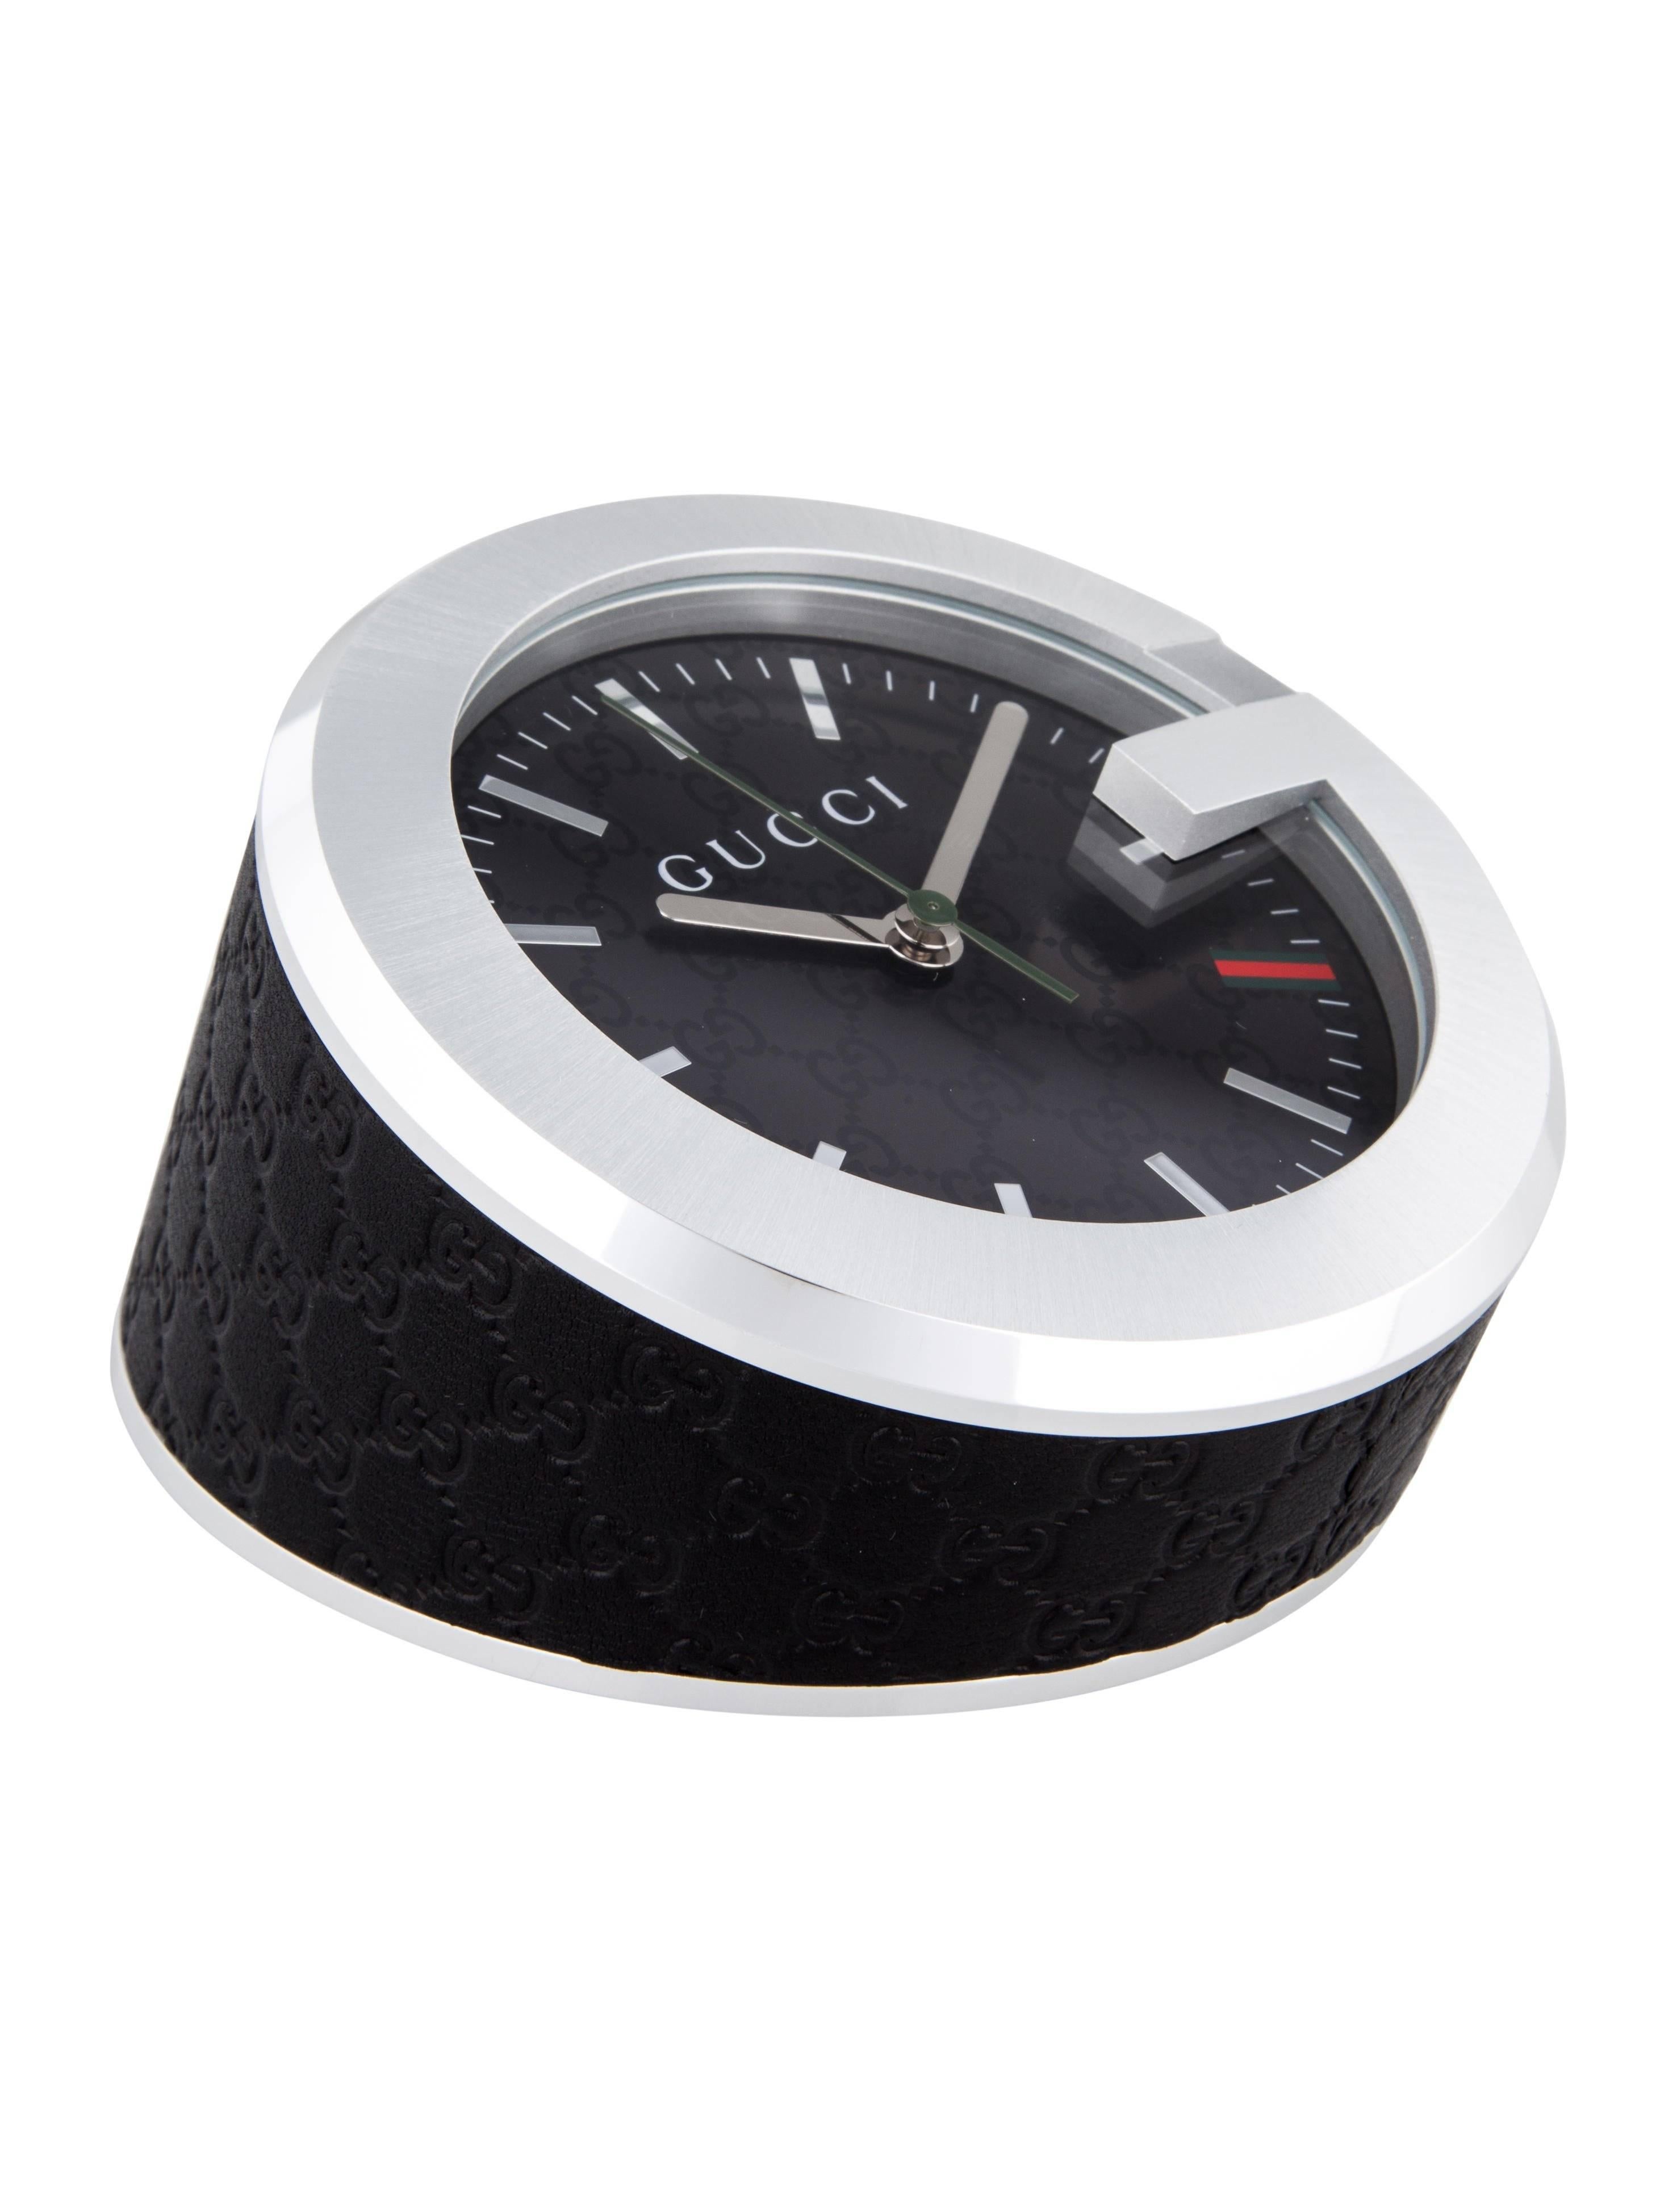 CURATOR'S NOTES

Gucci New Men's Black Leather Stainless Steel Table Desk Clock in Box 

Leather 
Stainless steel 
Black dial
Quartz movement
Signed Gucci underneath
Made in Switzerland
Diameter 4"
Height 3"
Includes original Gucci box,